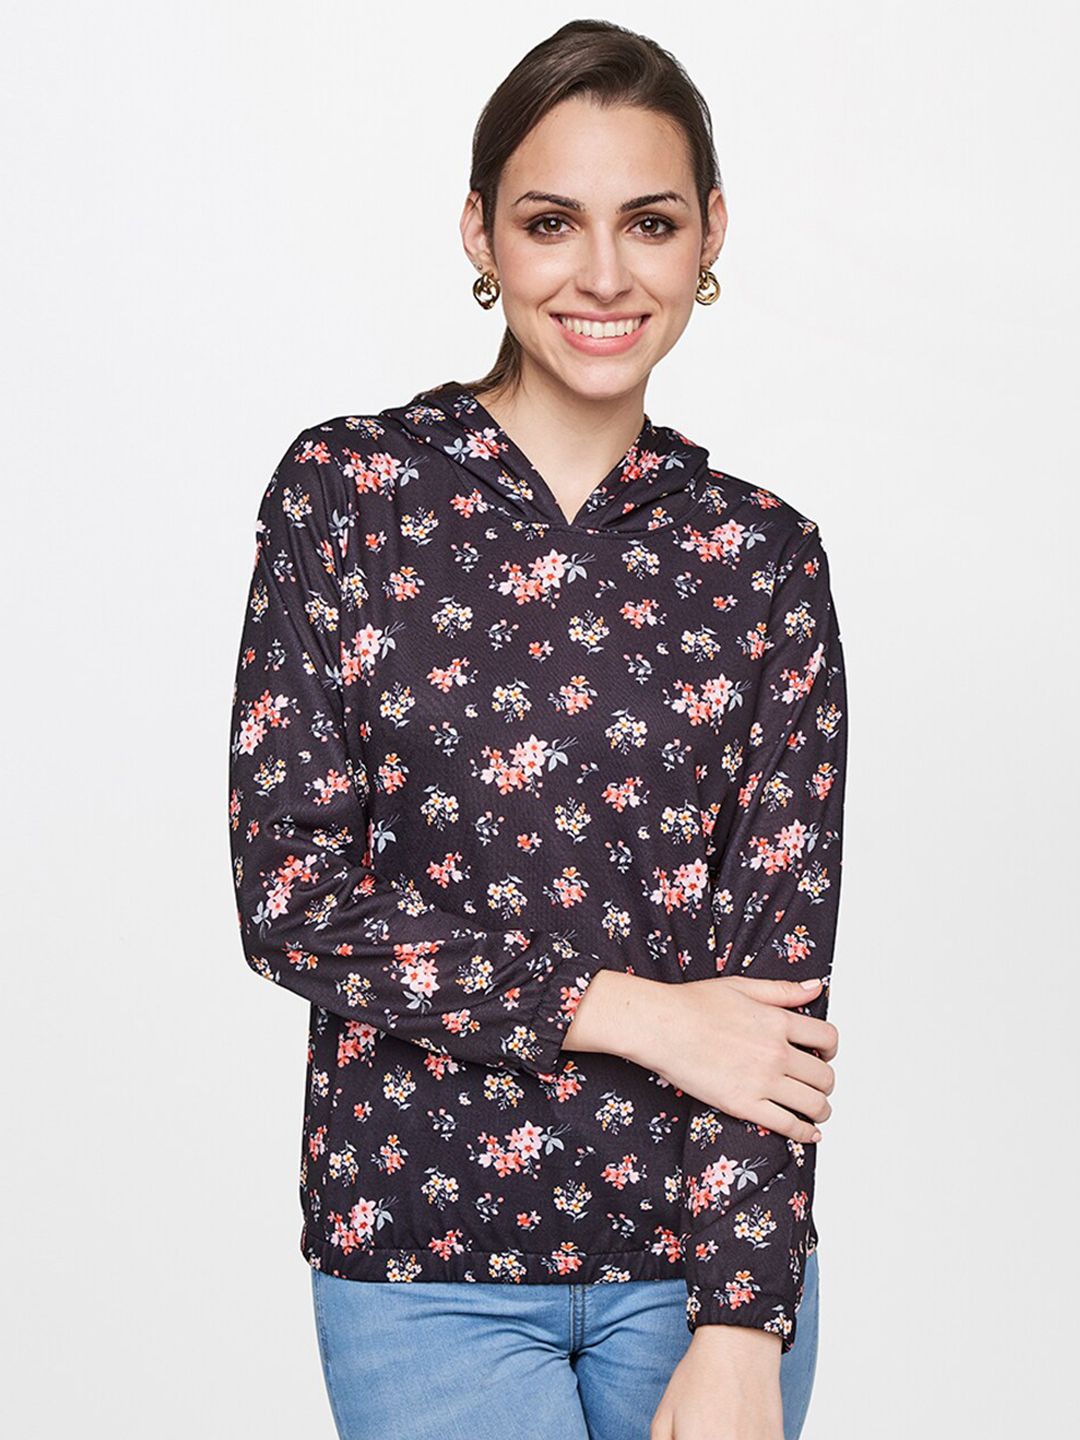 AND Women Black & Peach Floral Print Top Price in India